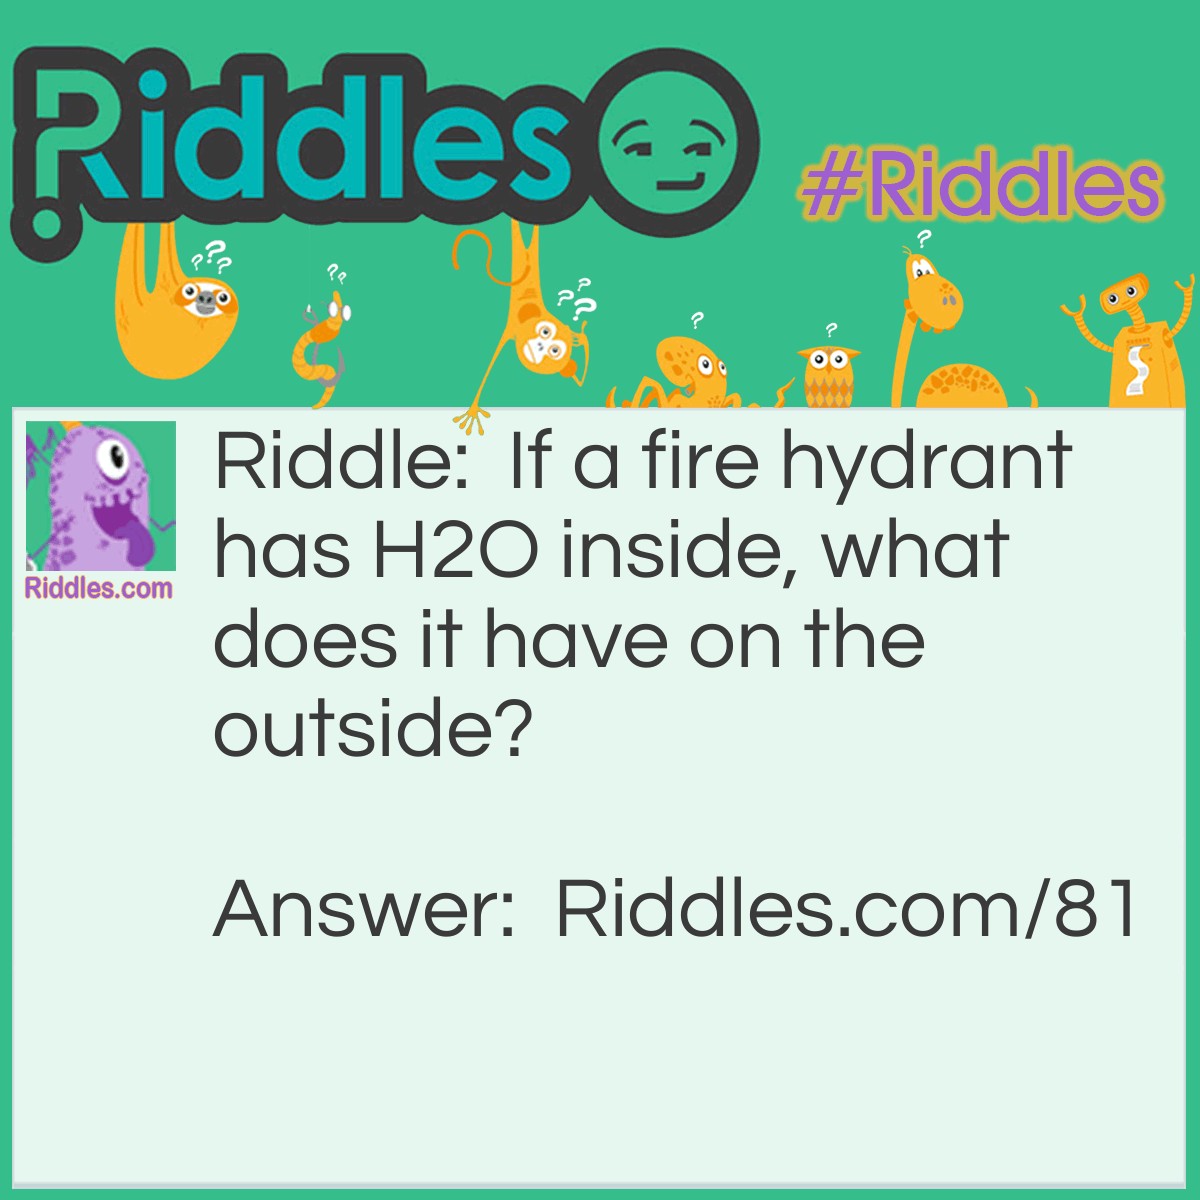 Riddle: If a fire hydrant has H2O inside, what does it have on the outside? Answer: K9P (you'll get it eventually).